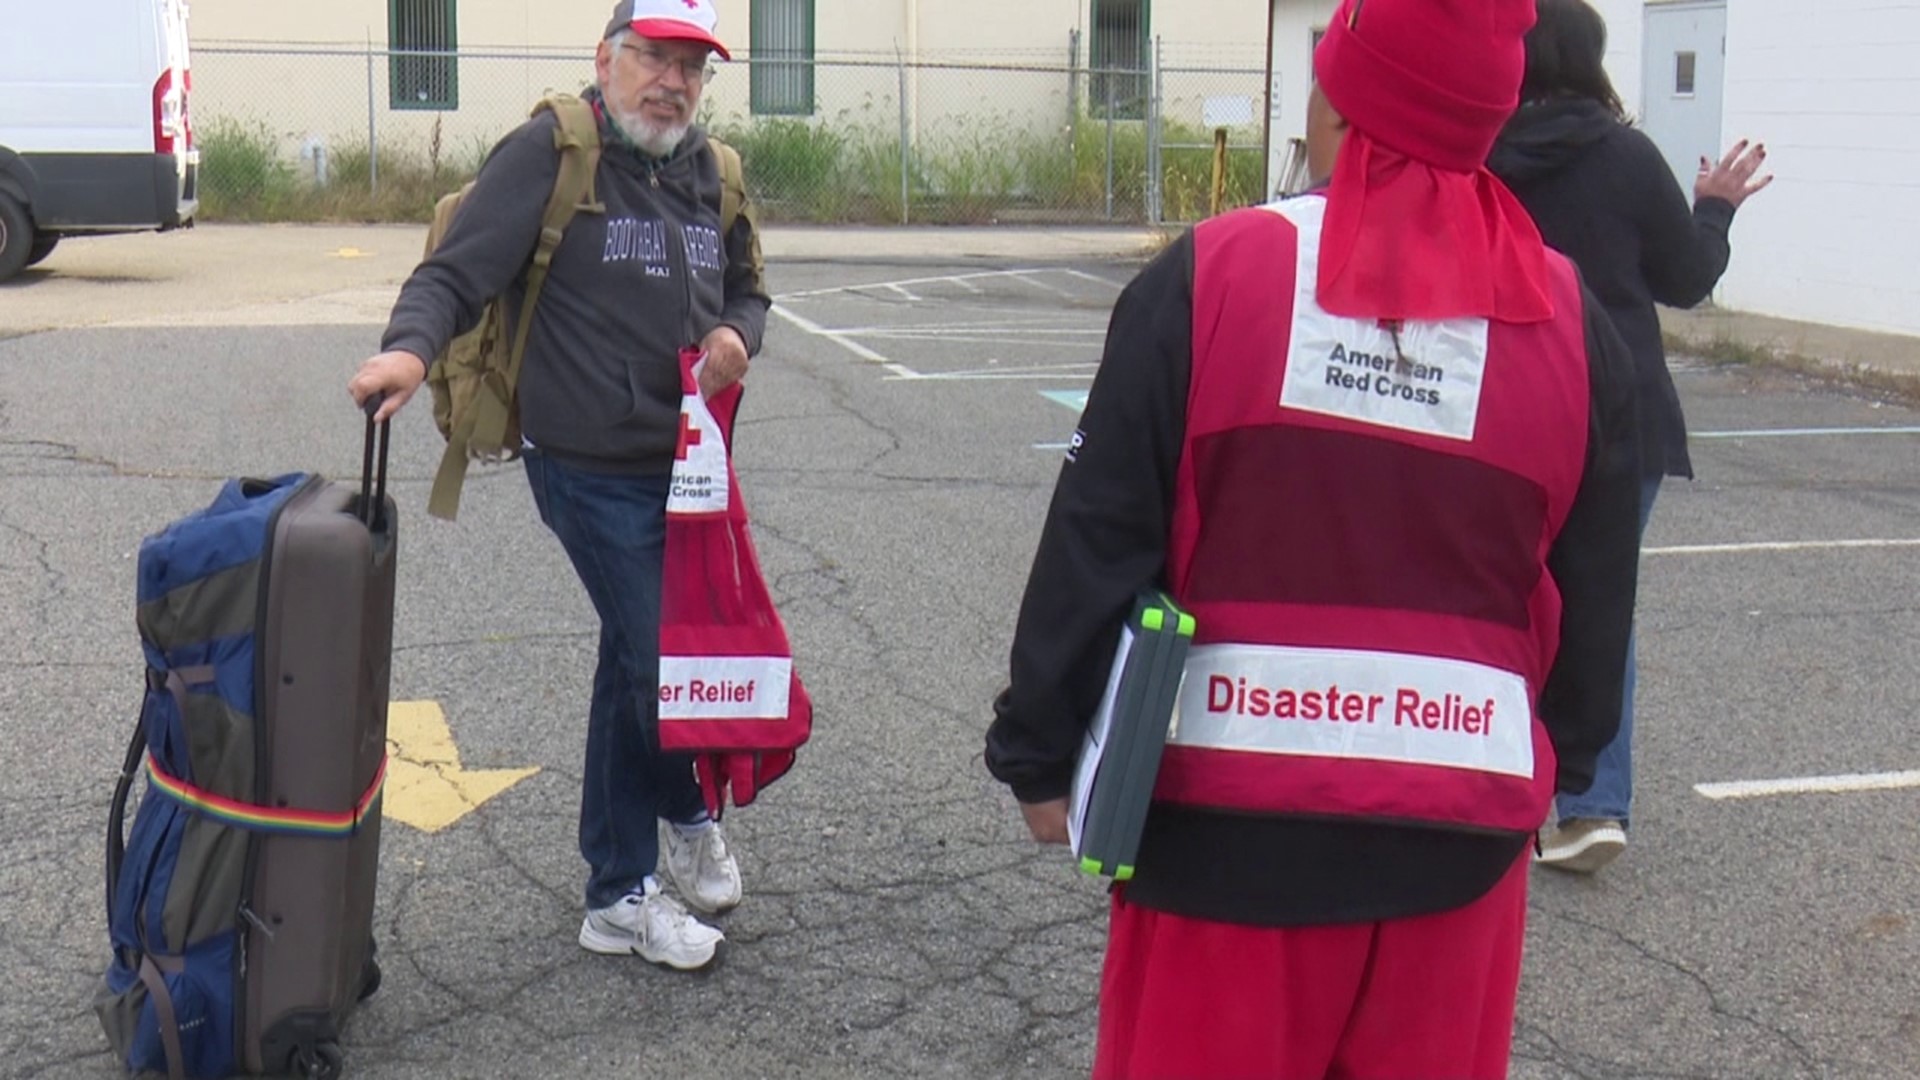 The volunteers will assist with relief efforts after Hurricane Ian devastated parts of Florida.